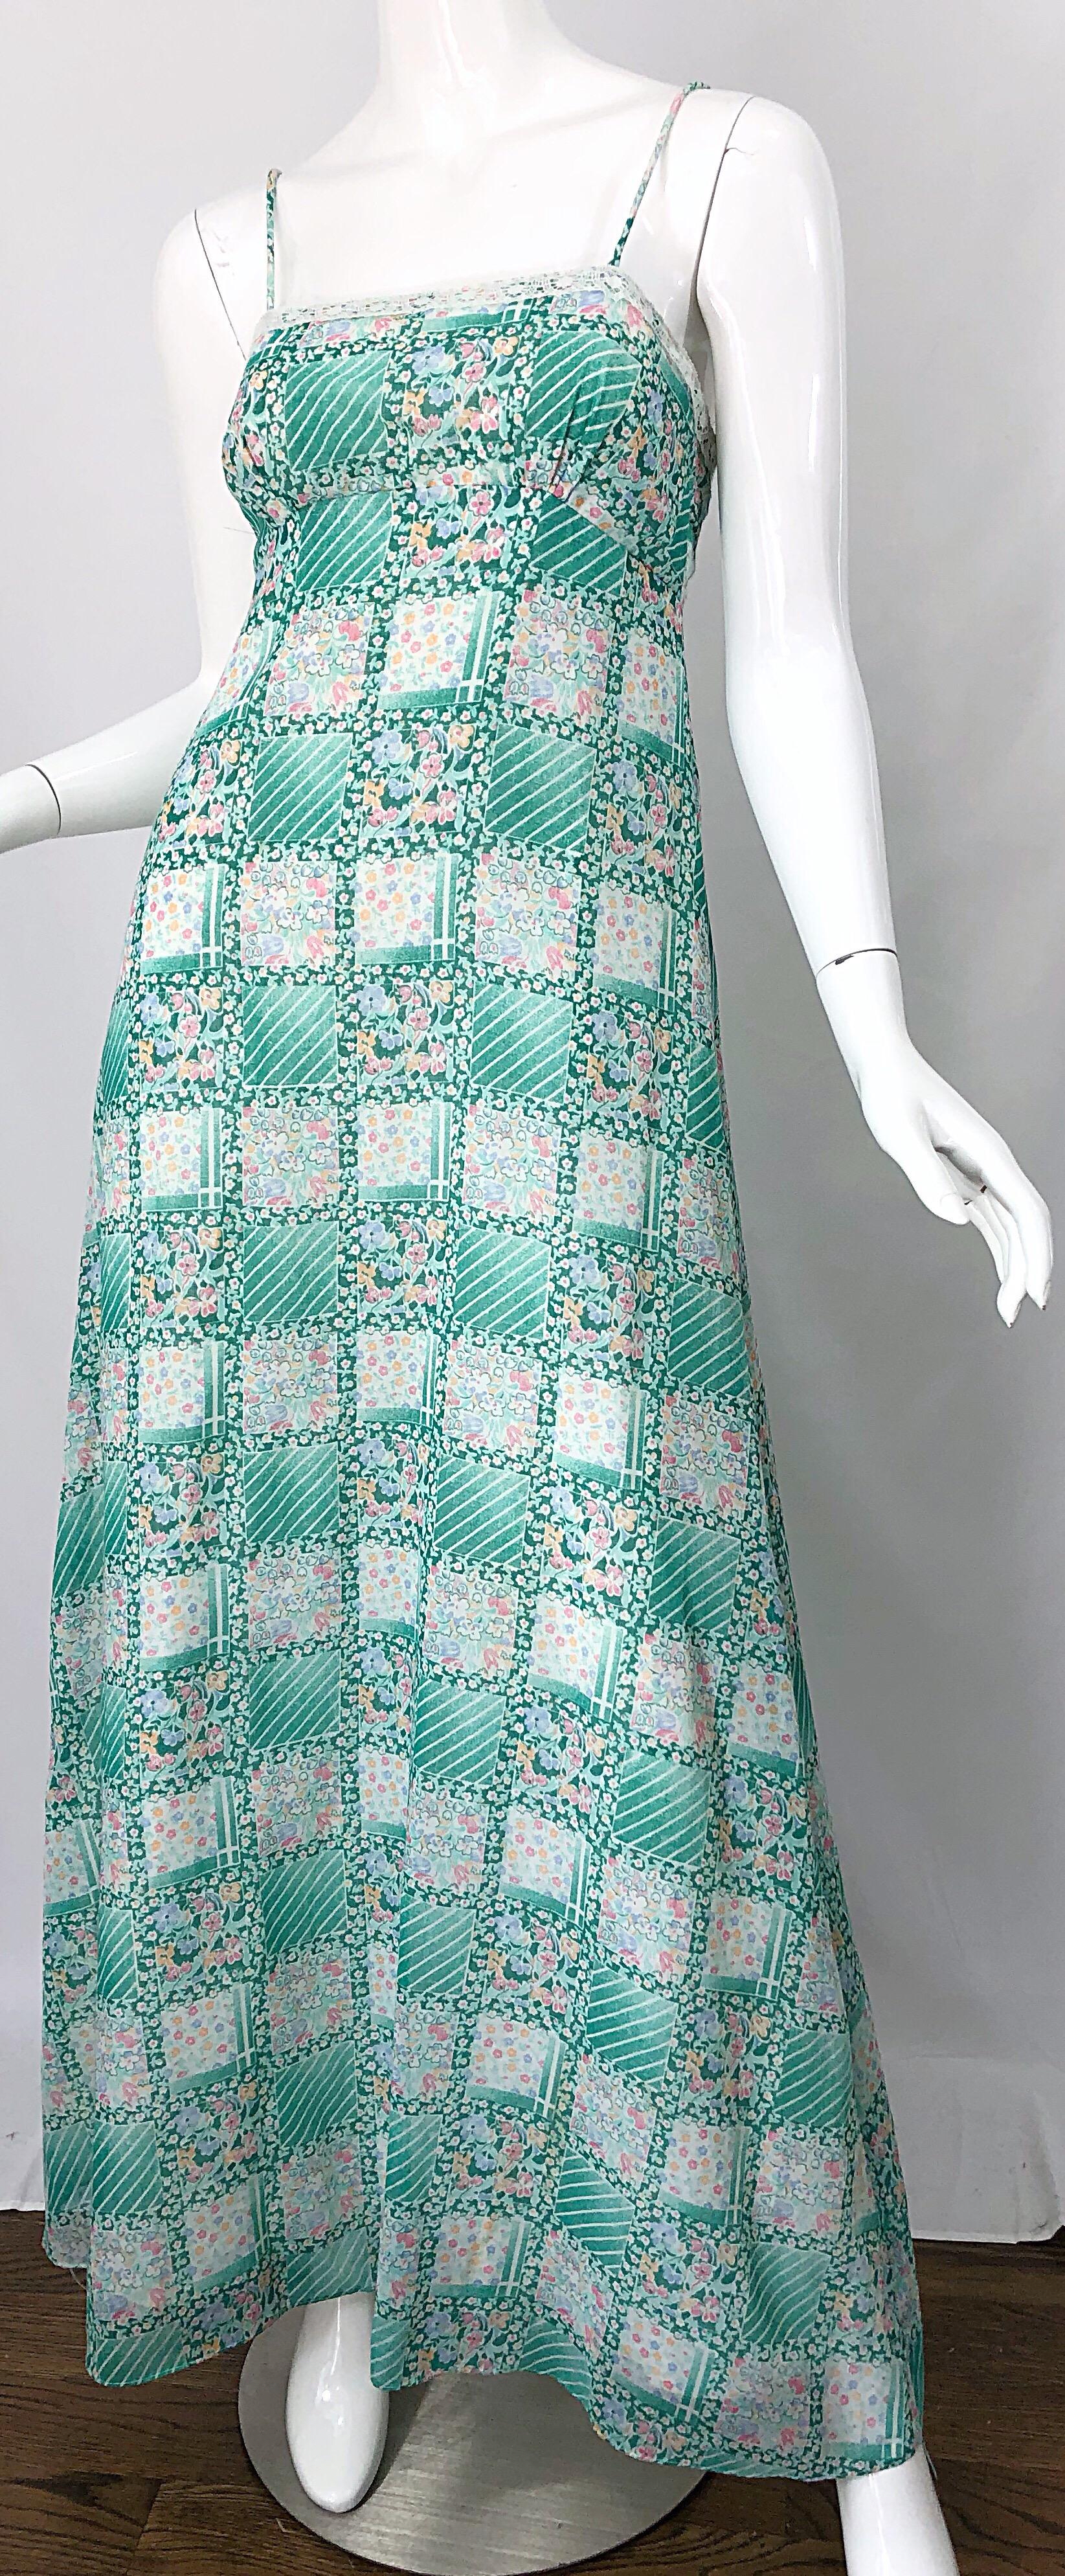 1970s Teal Green Blue Pink Flower Printed Cotton + Lace Vintage 70s Maxi Dress For Sale 1